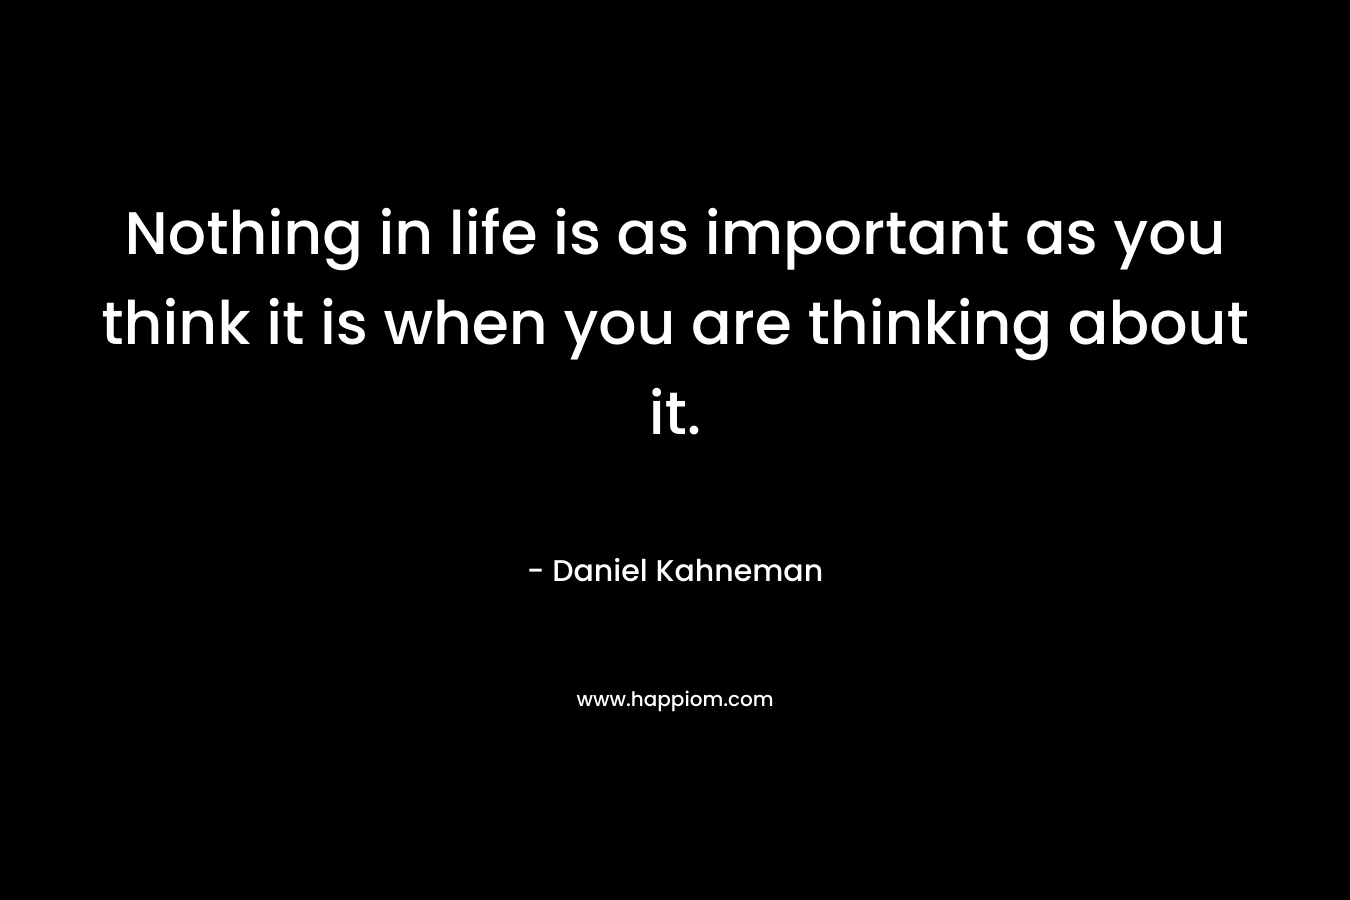 Nothing in life is as important as you think it is when you are thinking about it.